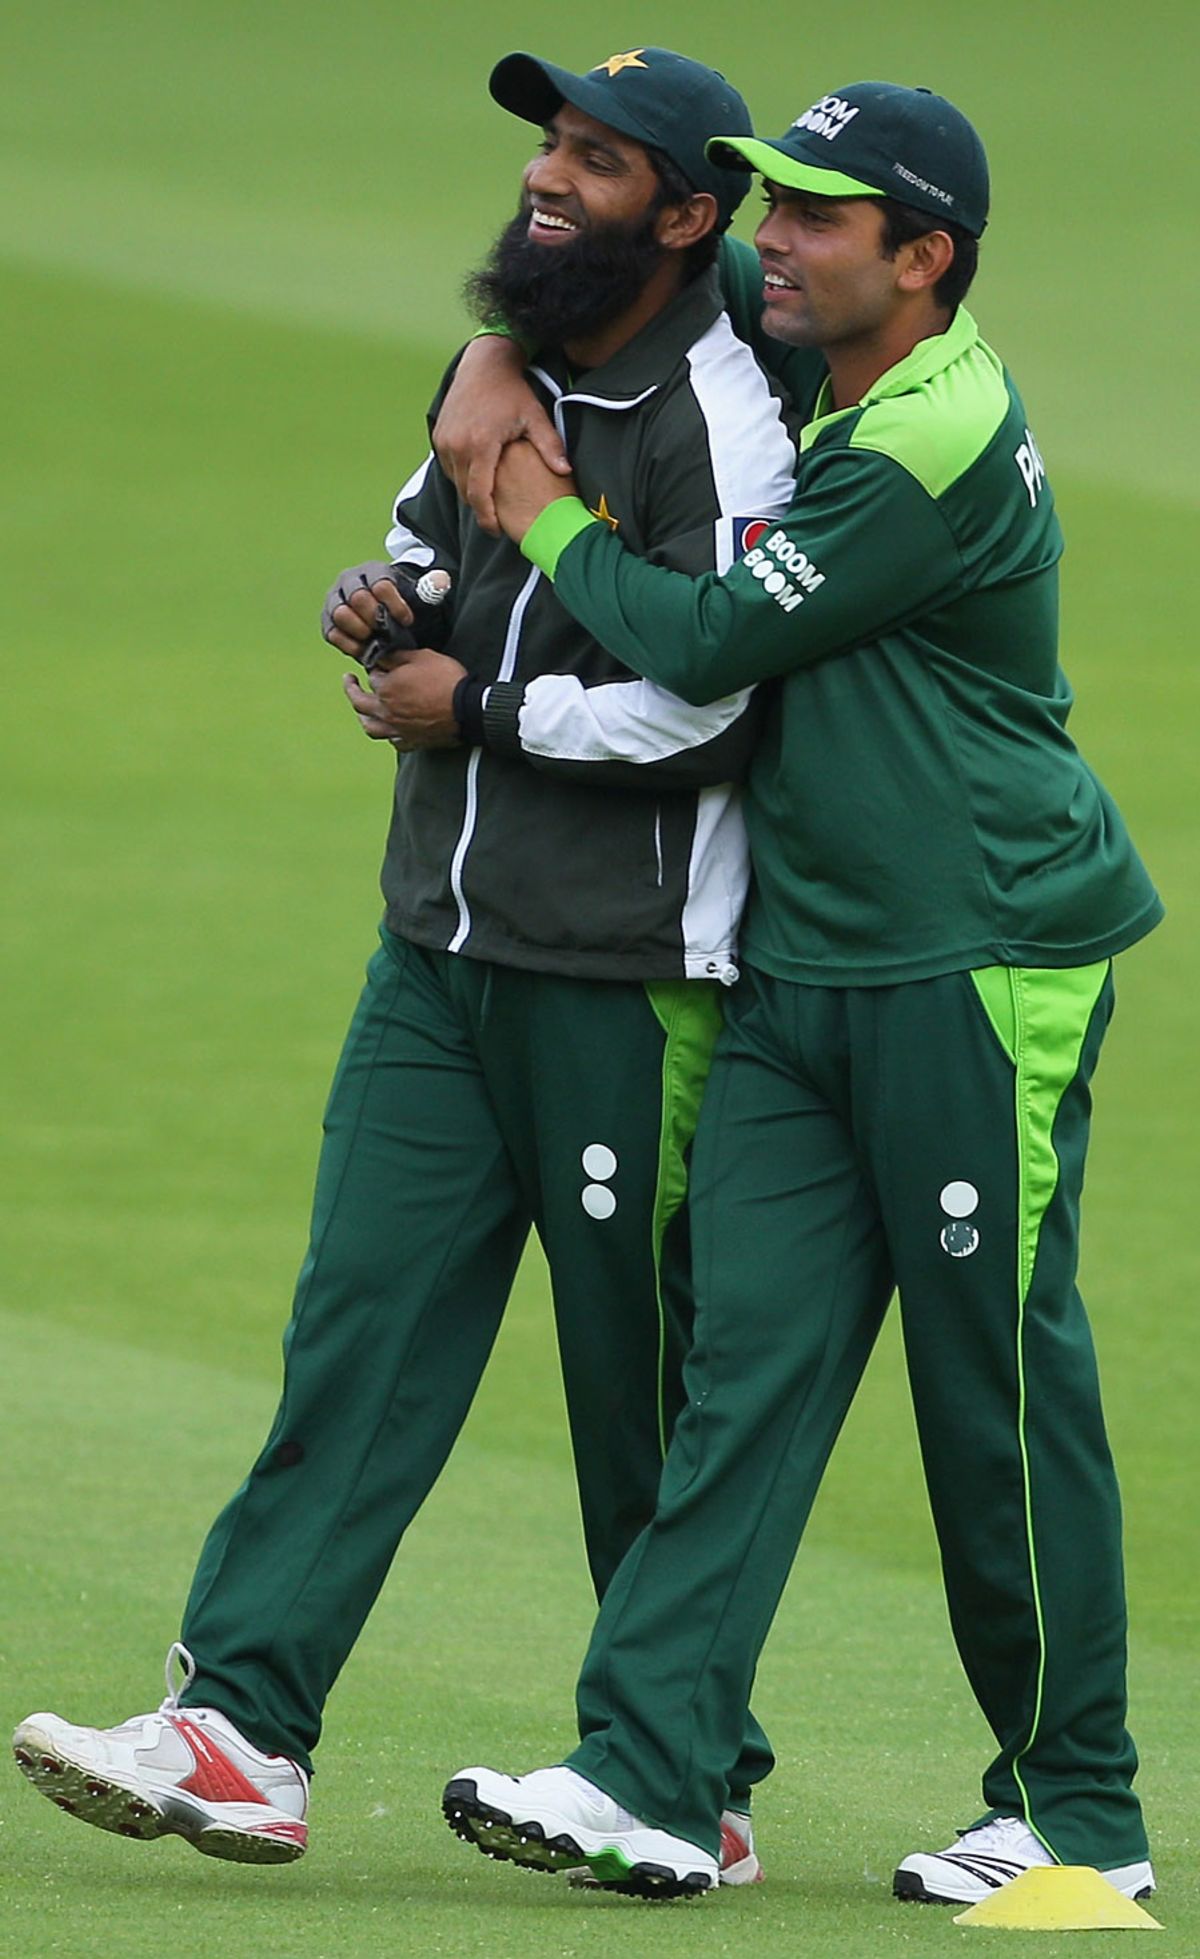 Mohammad Yousuf and Kamran Akmal share a joke as Pakistan prepare for the series finale at Lord's, August 24, 2010